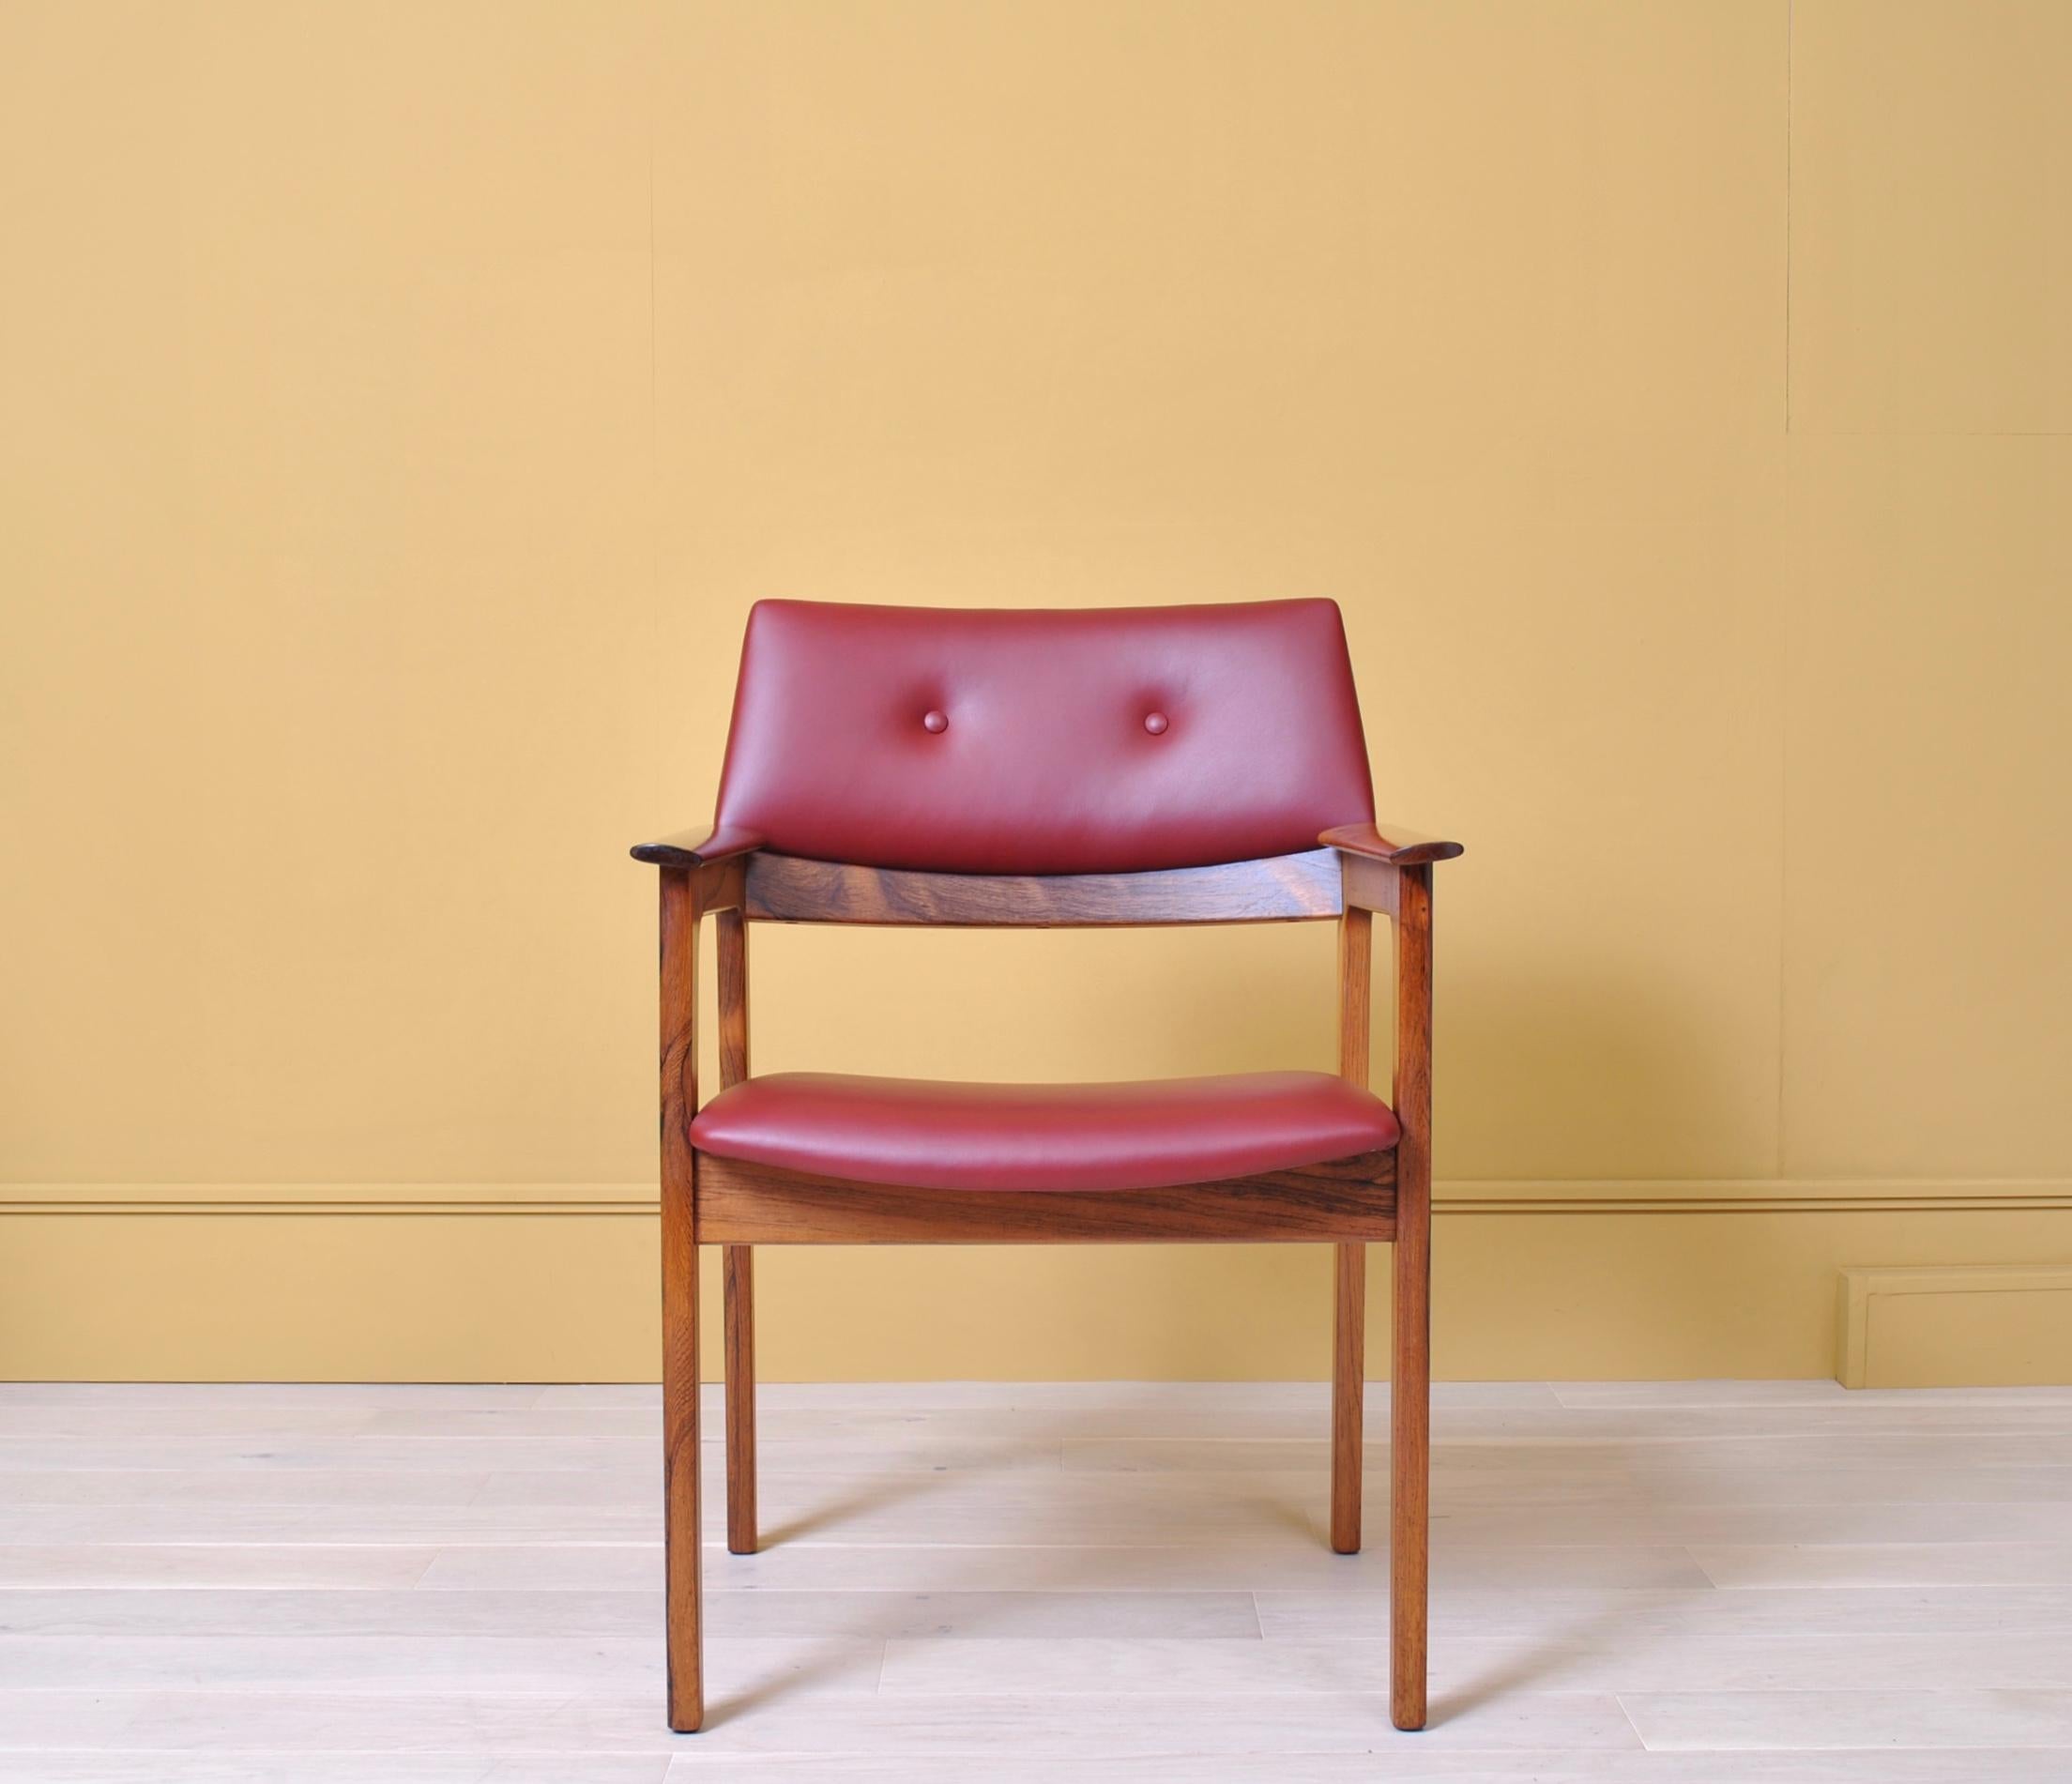 Versatile Danish midcentury chairs. Fully re-upholstered in fine Italian leather. Incredible wild grained frames, and a bold modernist 1960s design that can be utilized in many ways, from desk chair, accent to dining room.
We have 5 available and 4